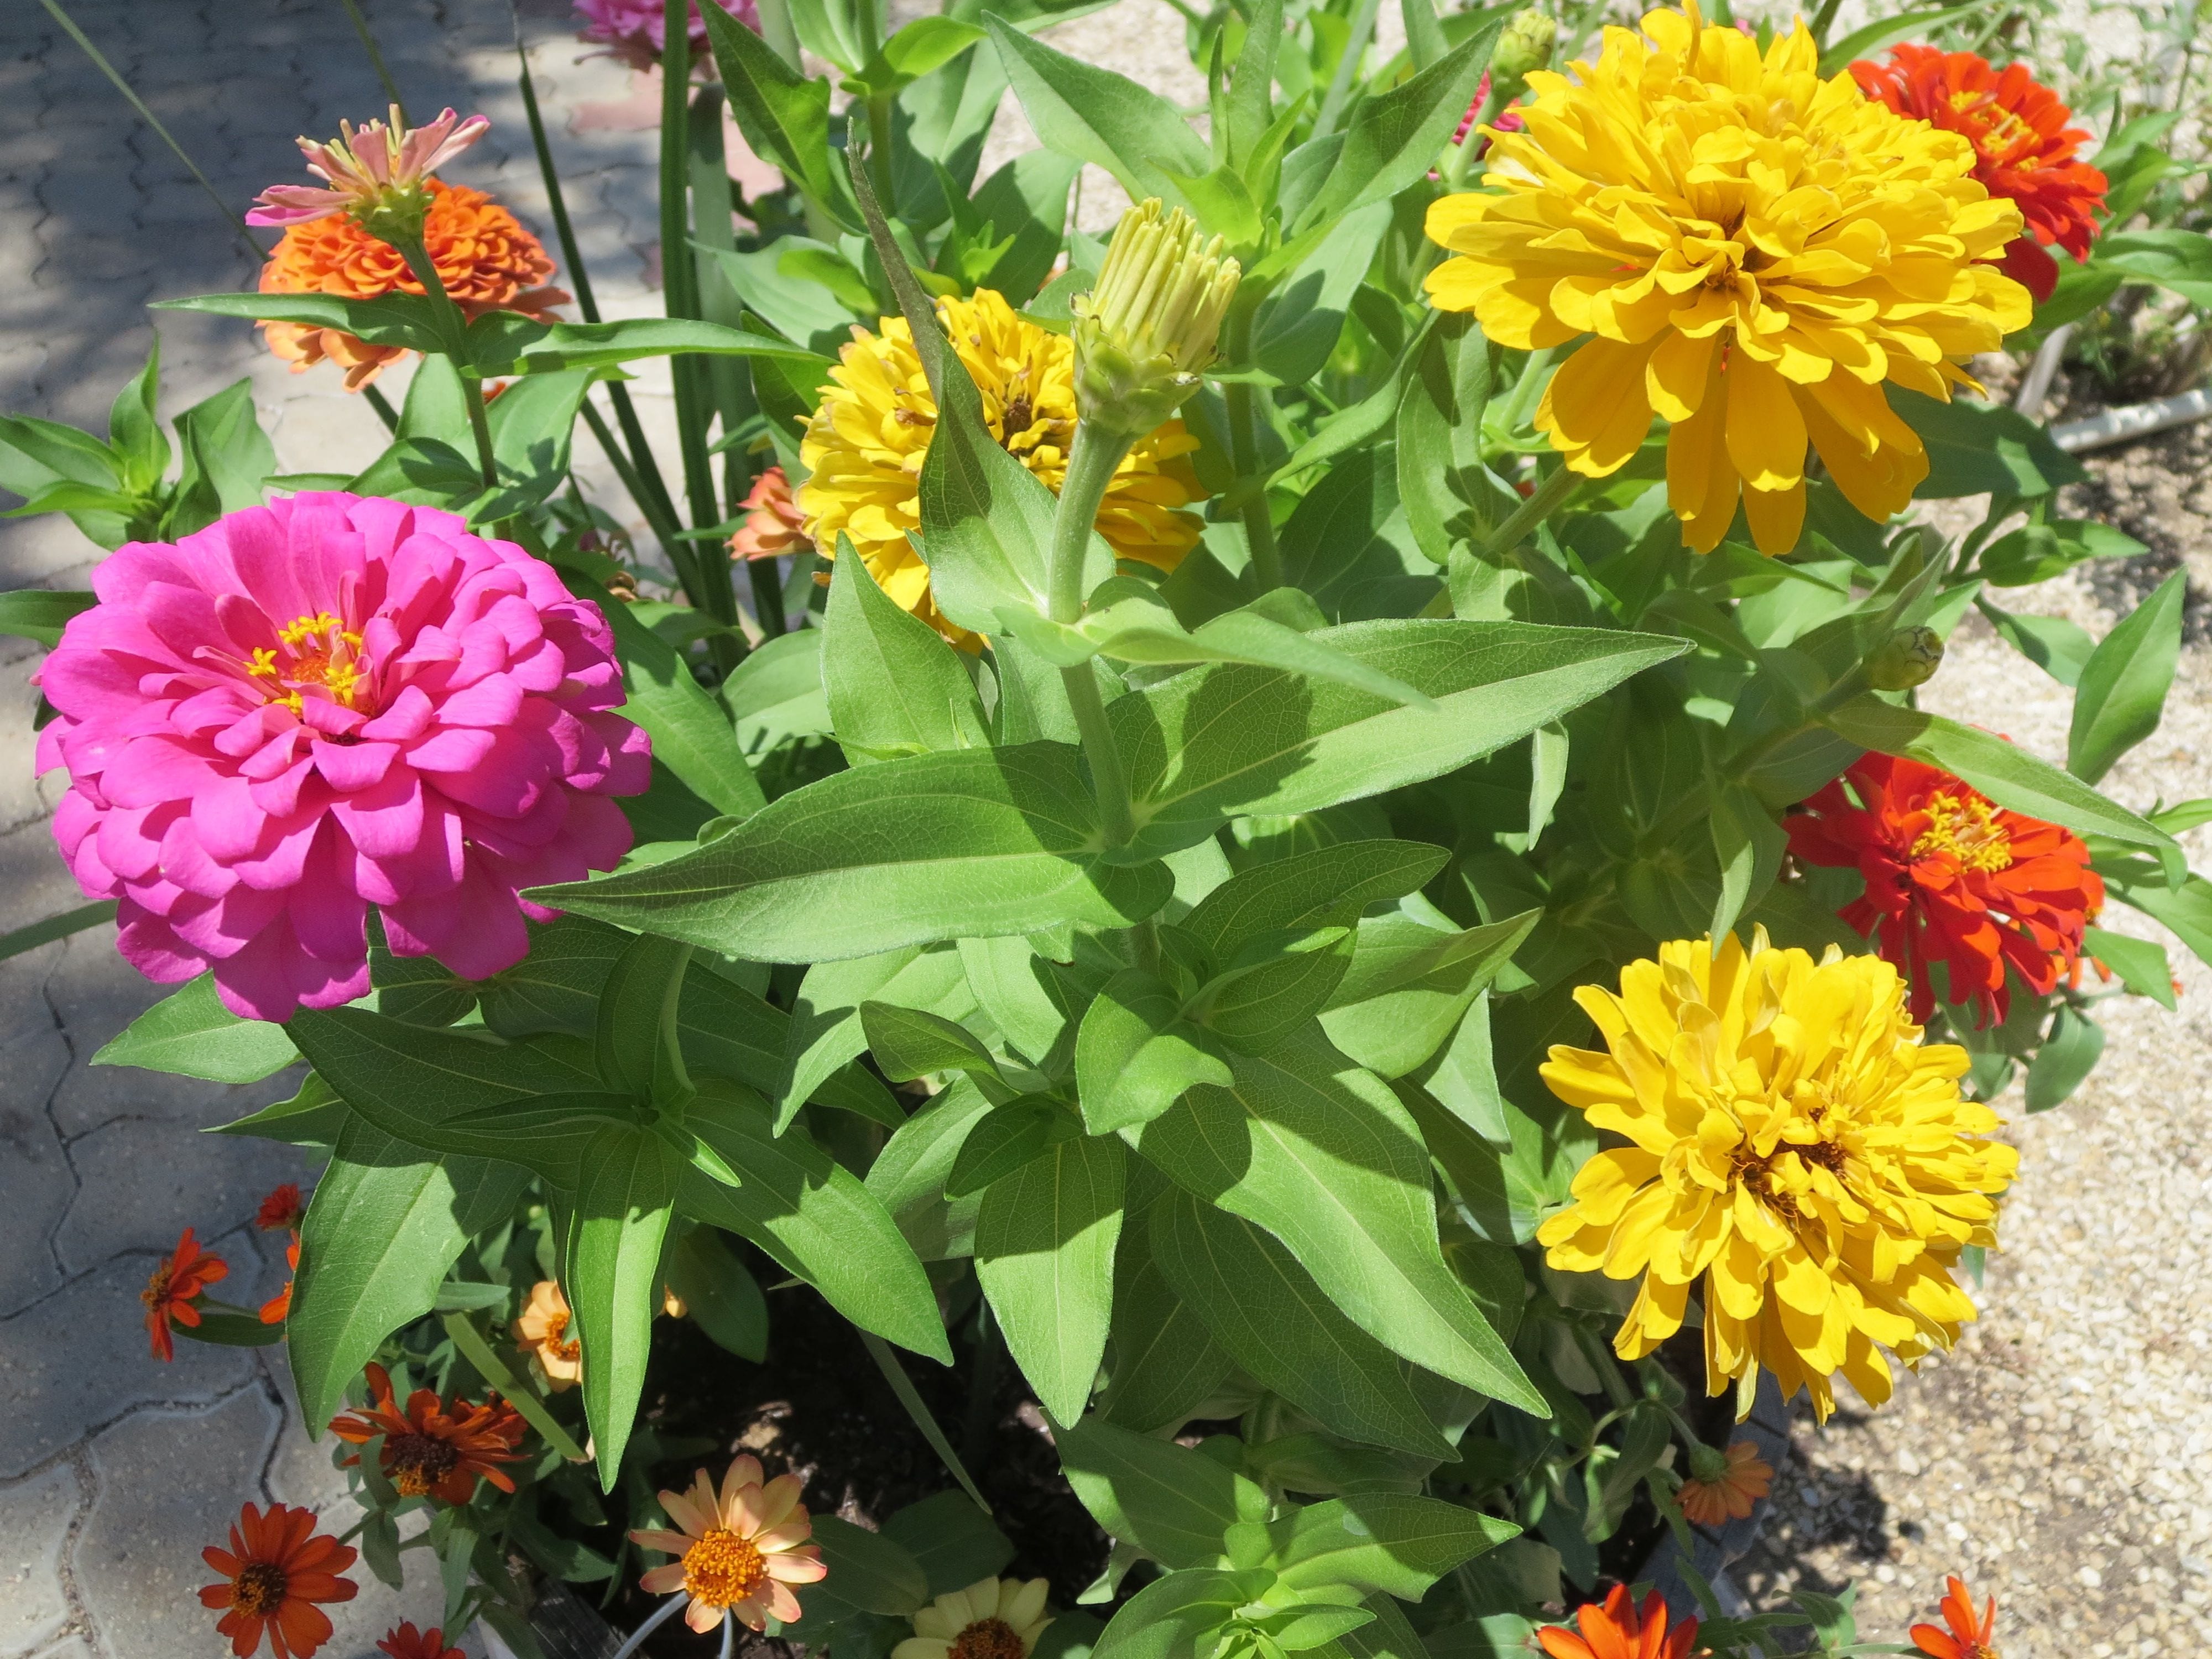 Zinnia are amazing fall annuals for nectar for our pollinators.